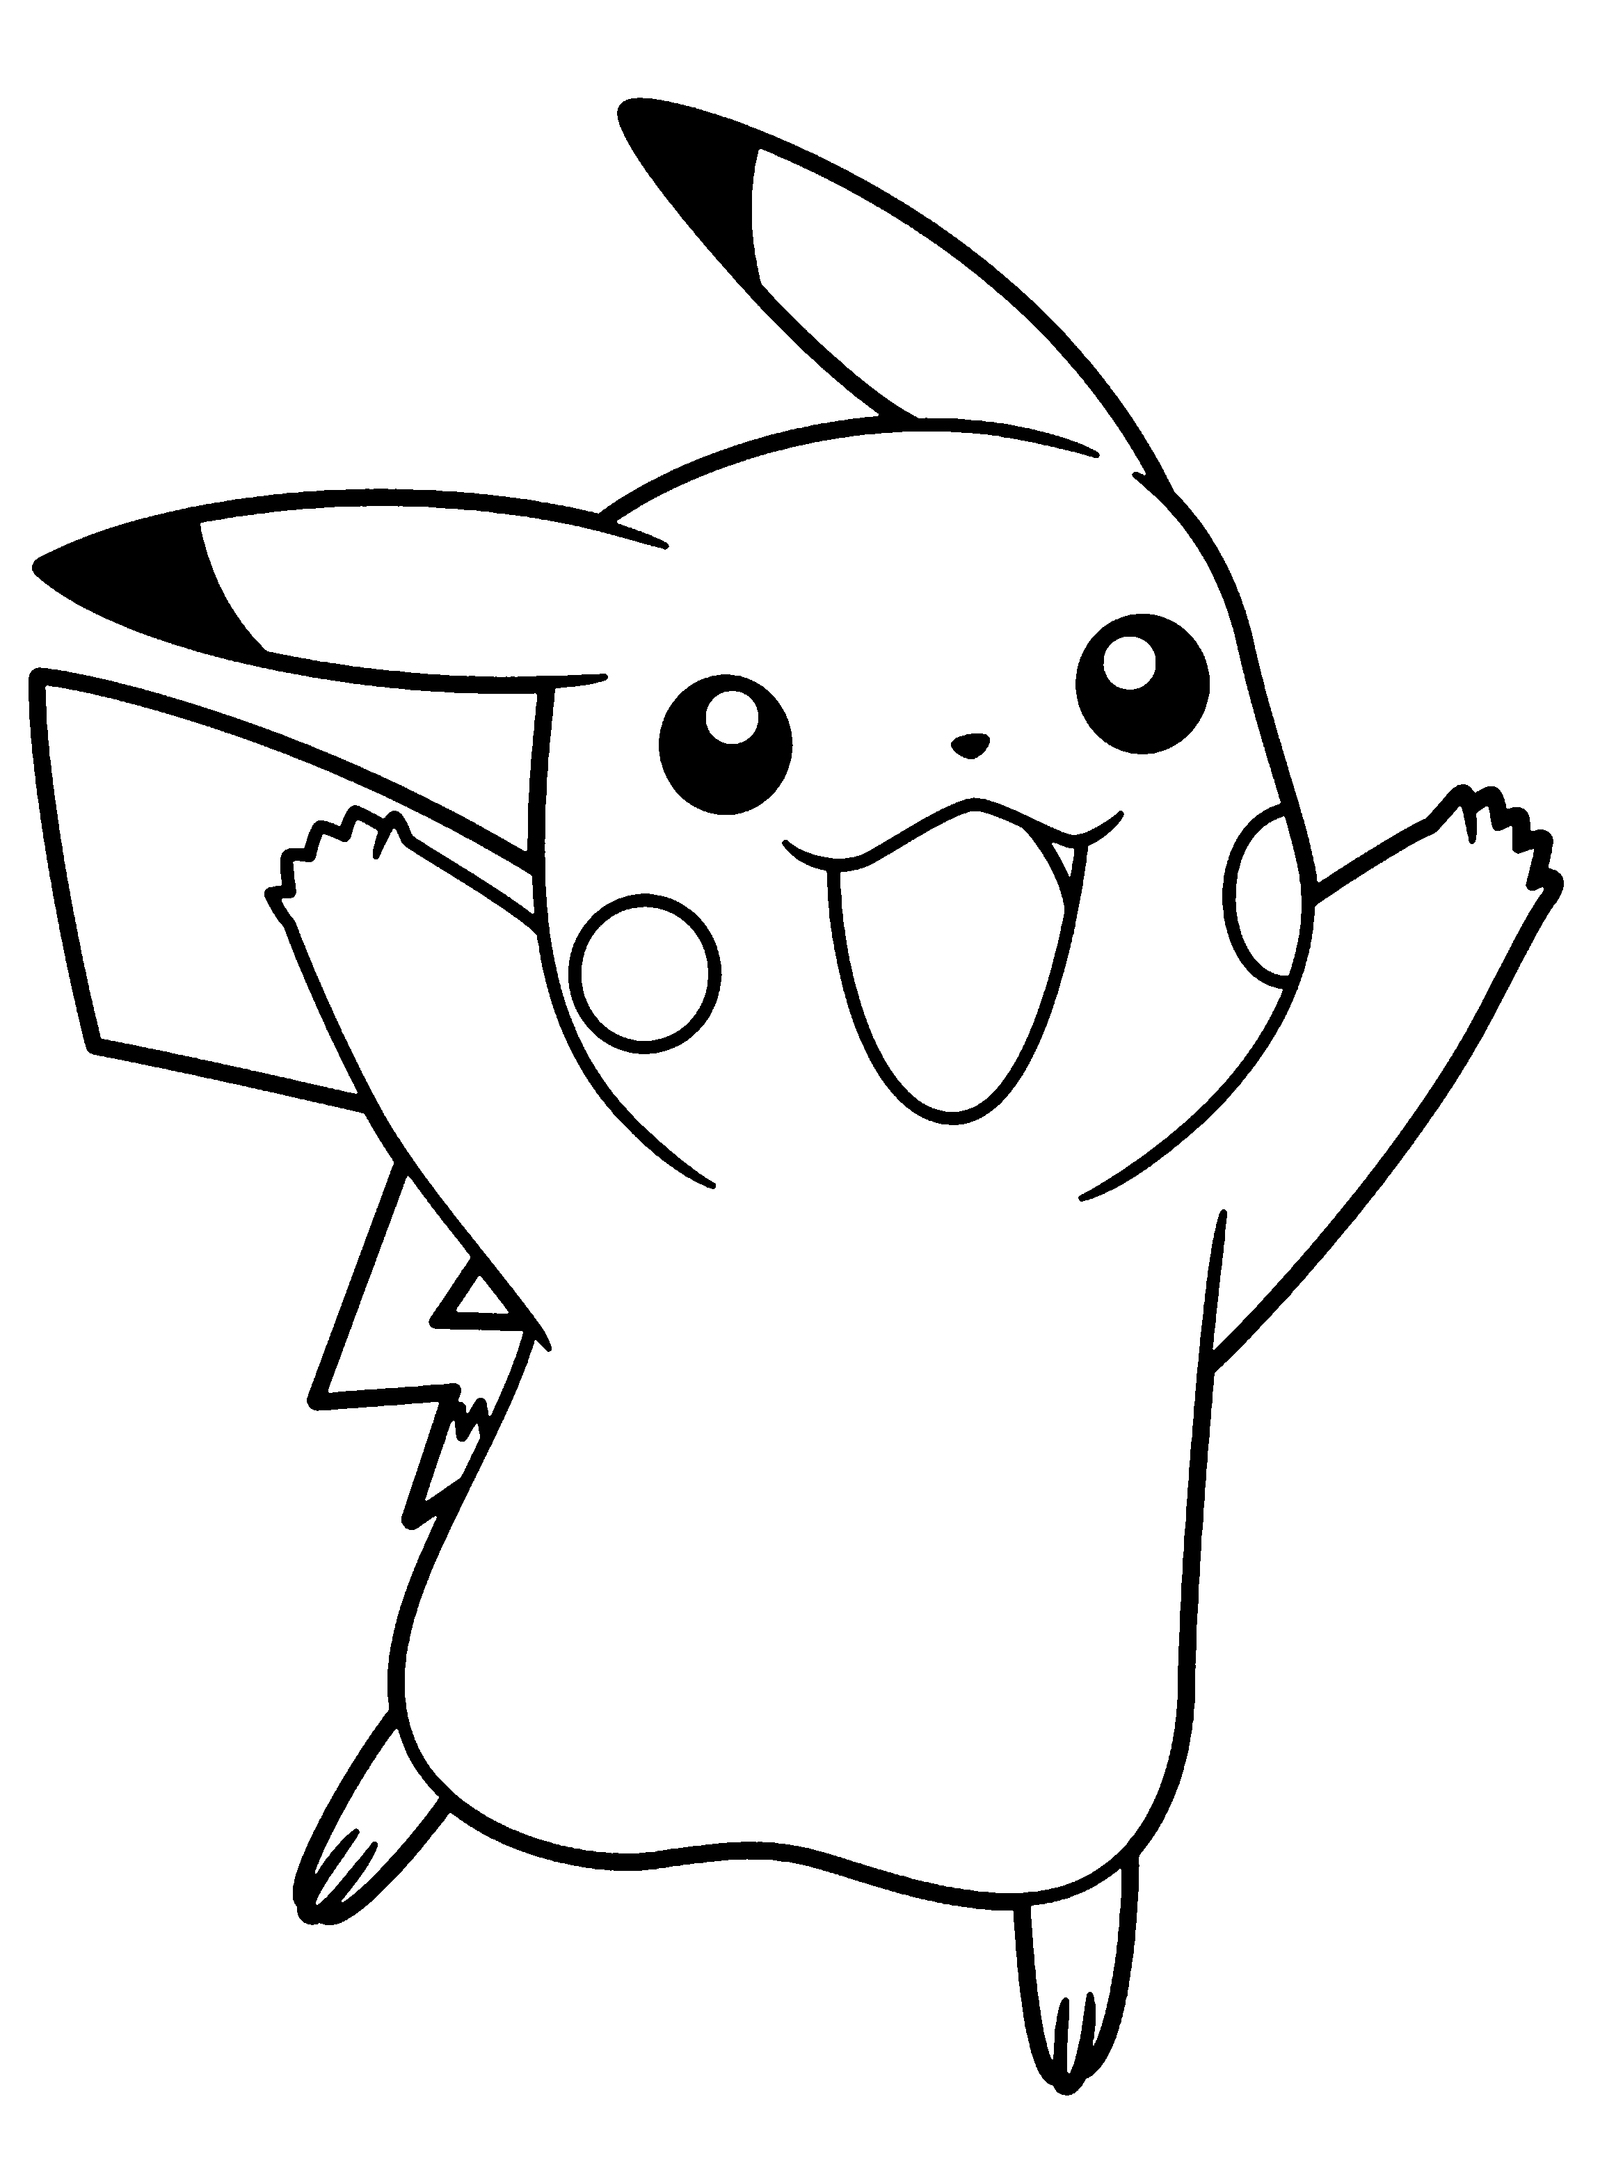 Pickachu coloring pages printable for free download